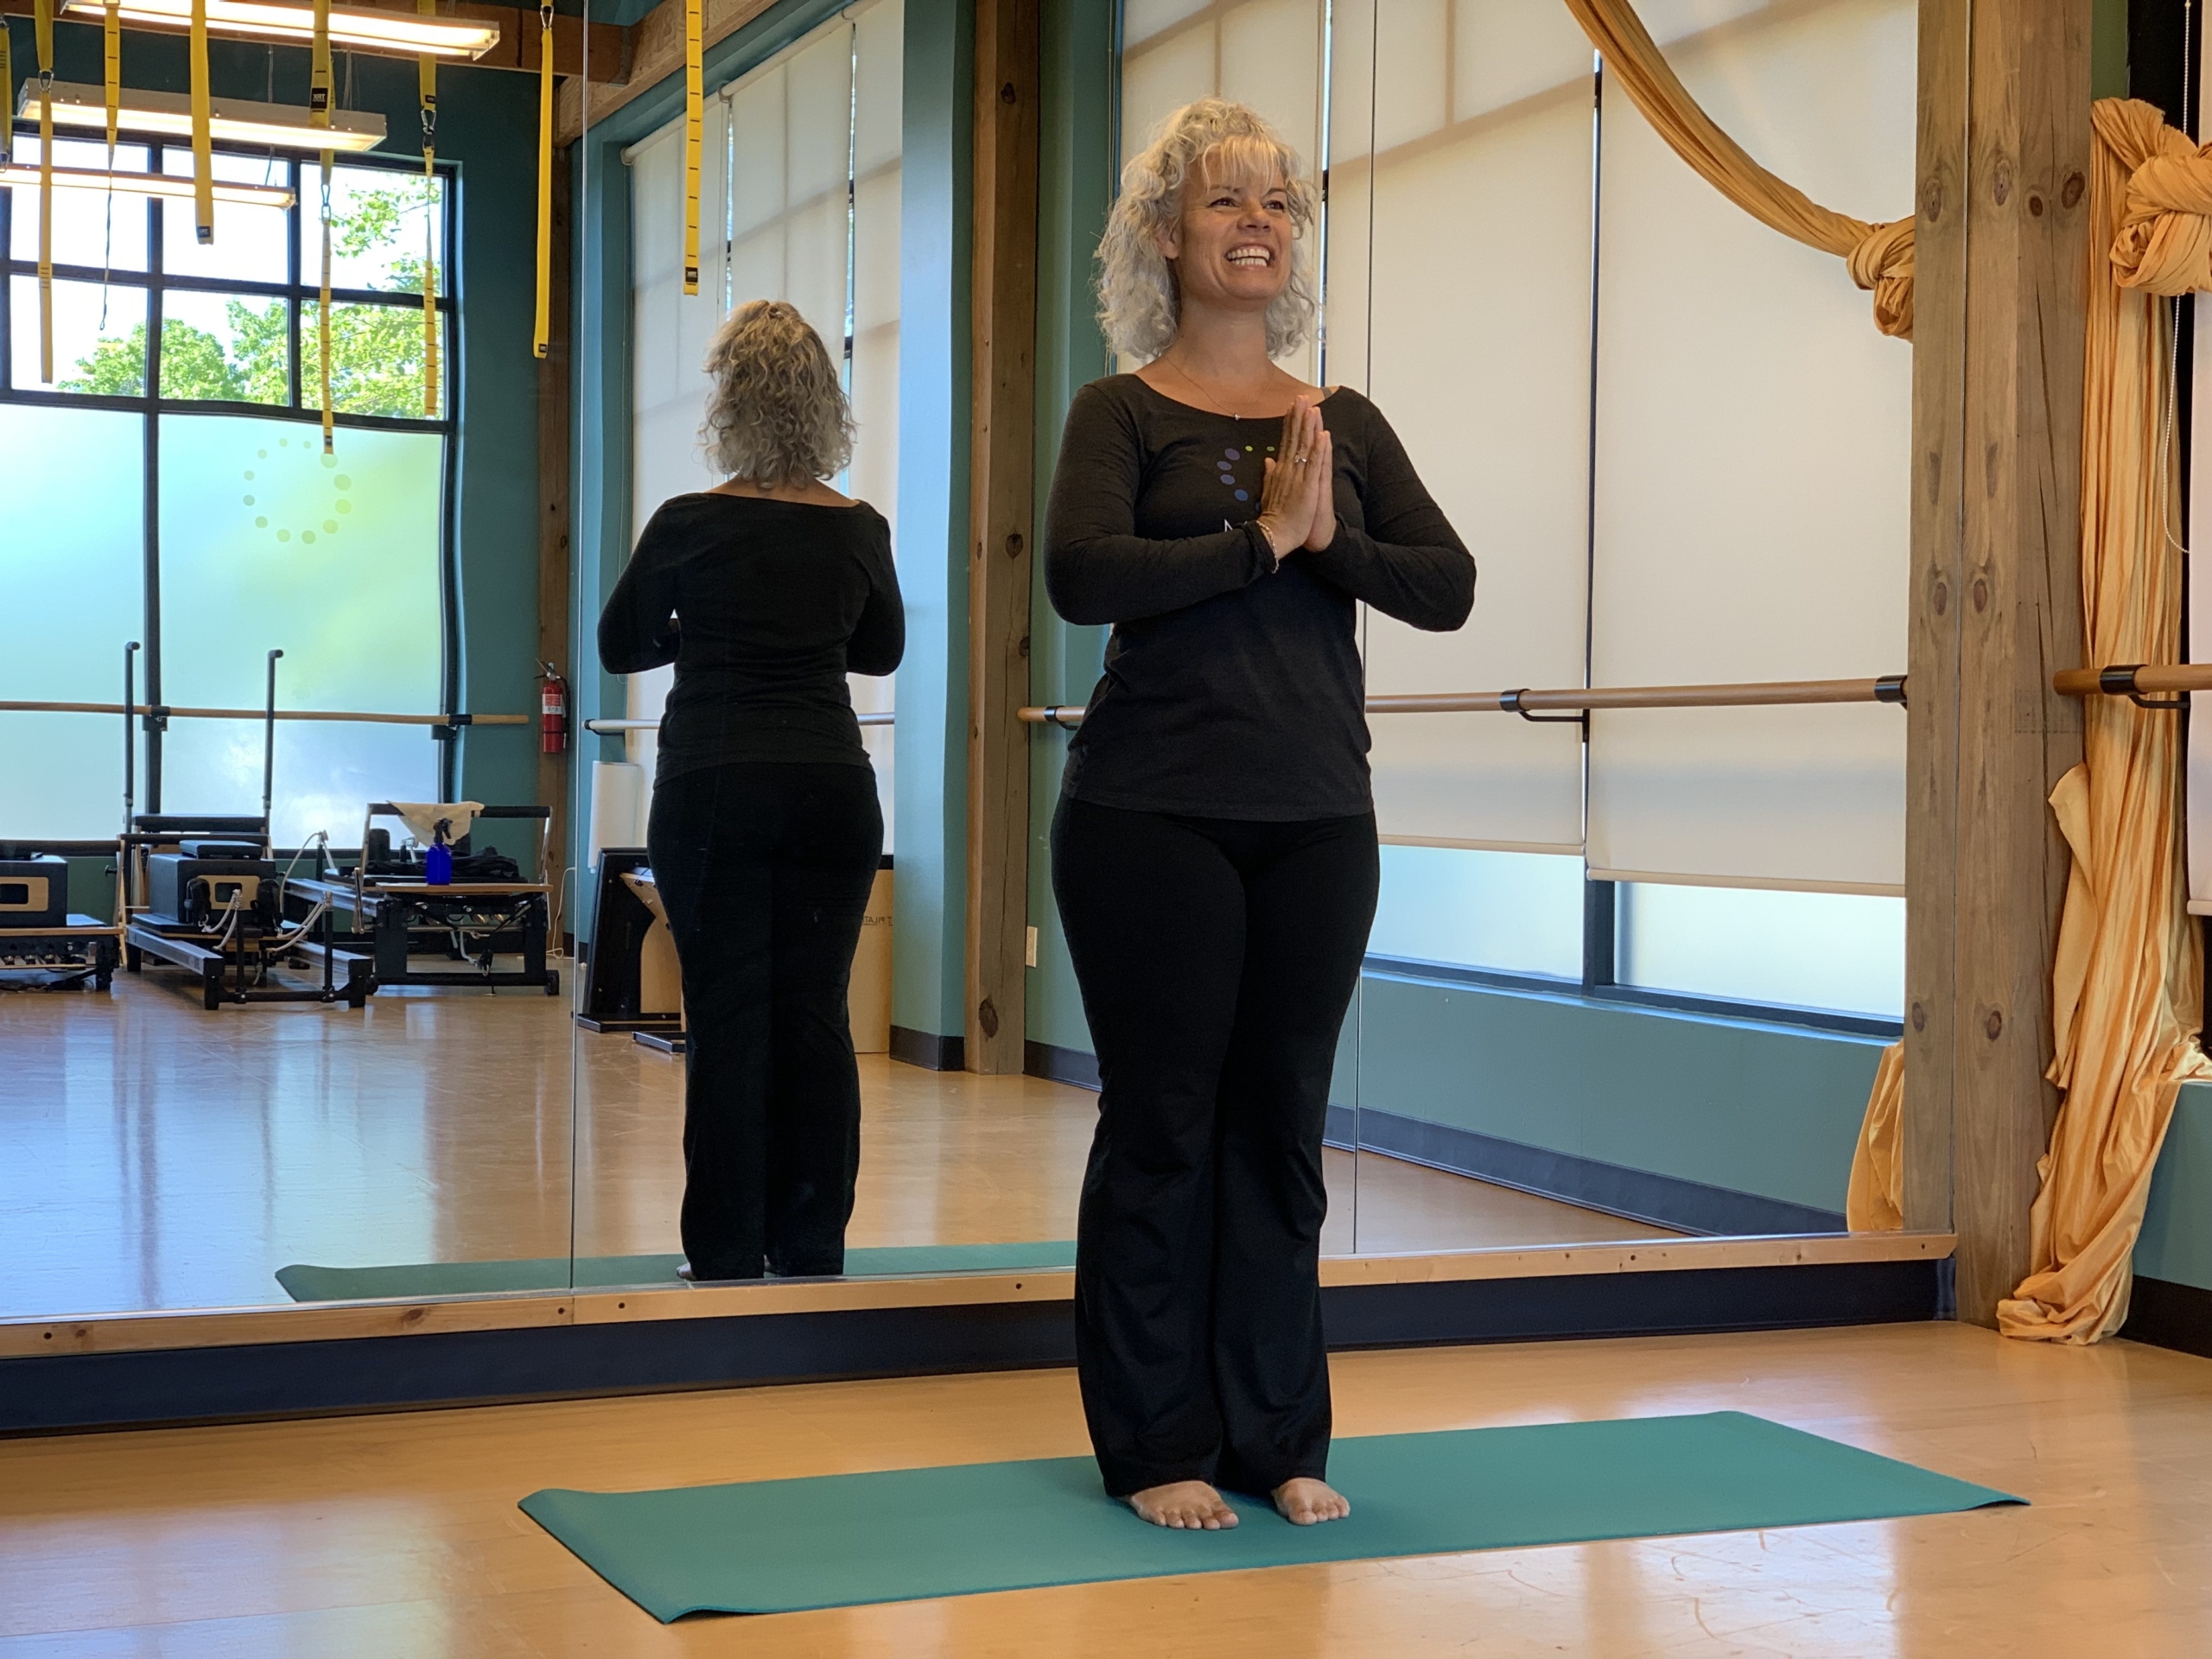 MOVE instructor Shannon Walter teaching yoga for healthy aging